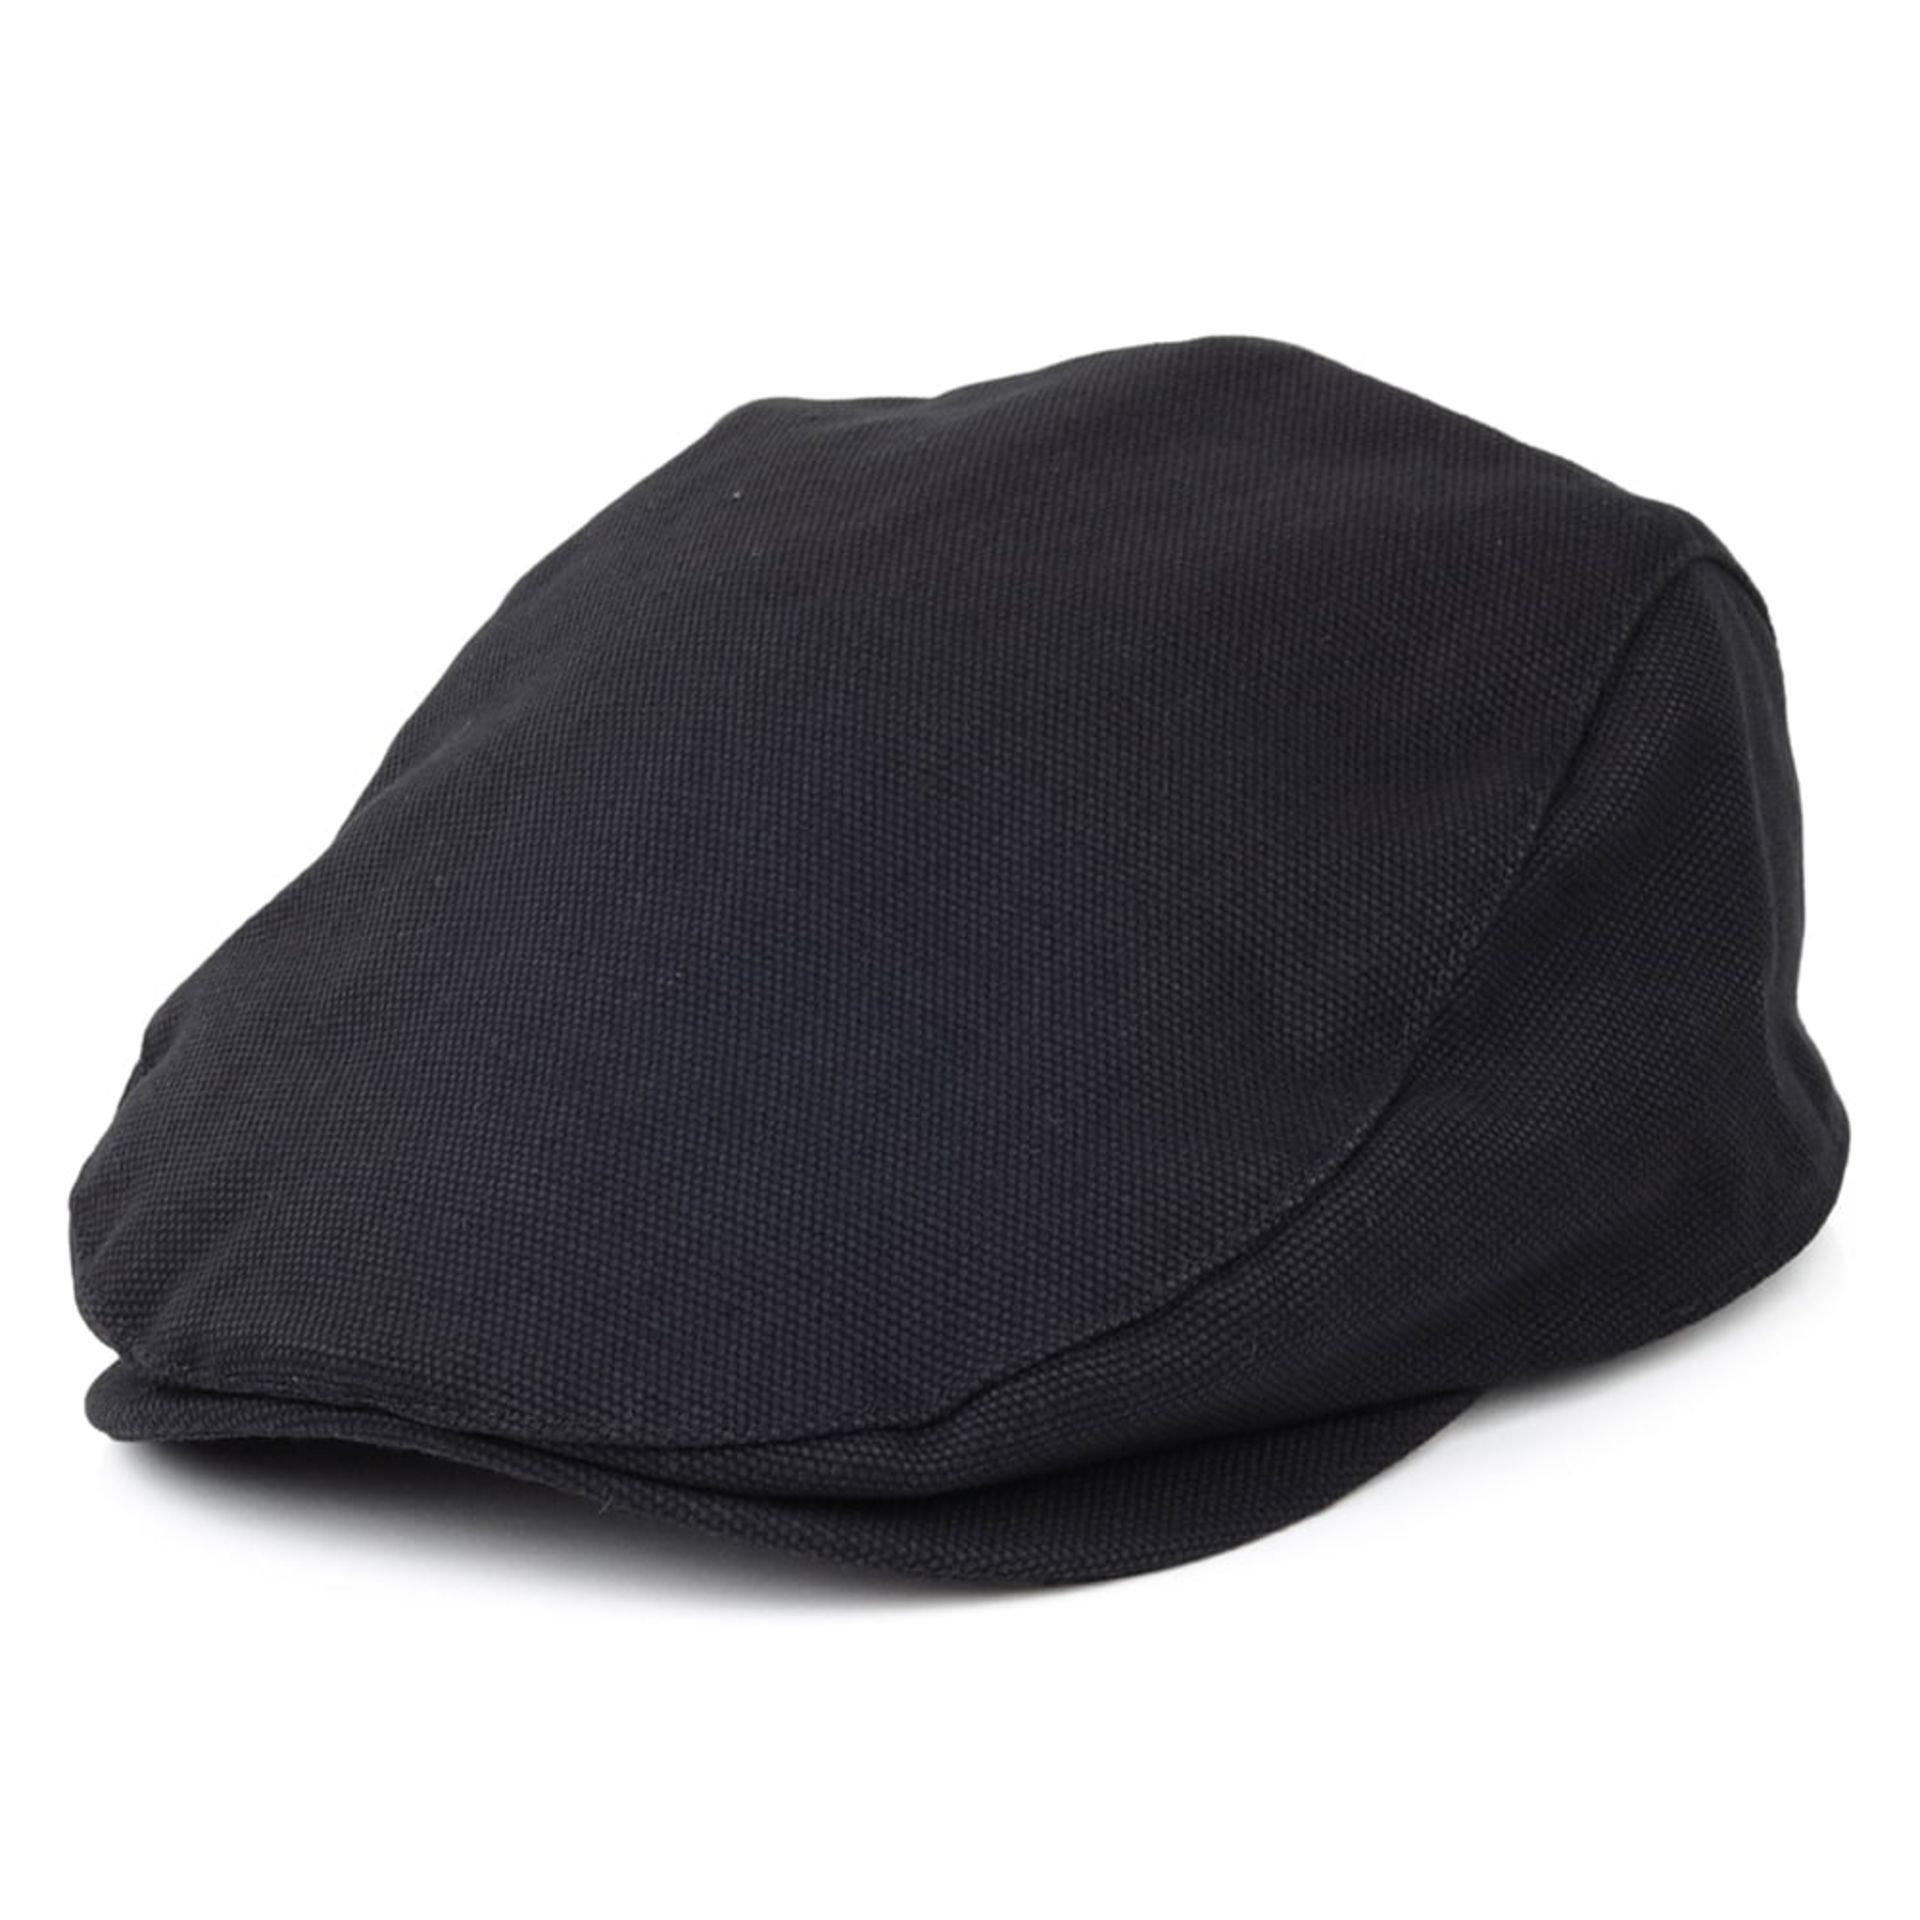 BRAND NEW BARBOUR NAVY CONTIN FLAT CAP SIZE LARGE RRP £35 -4